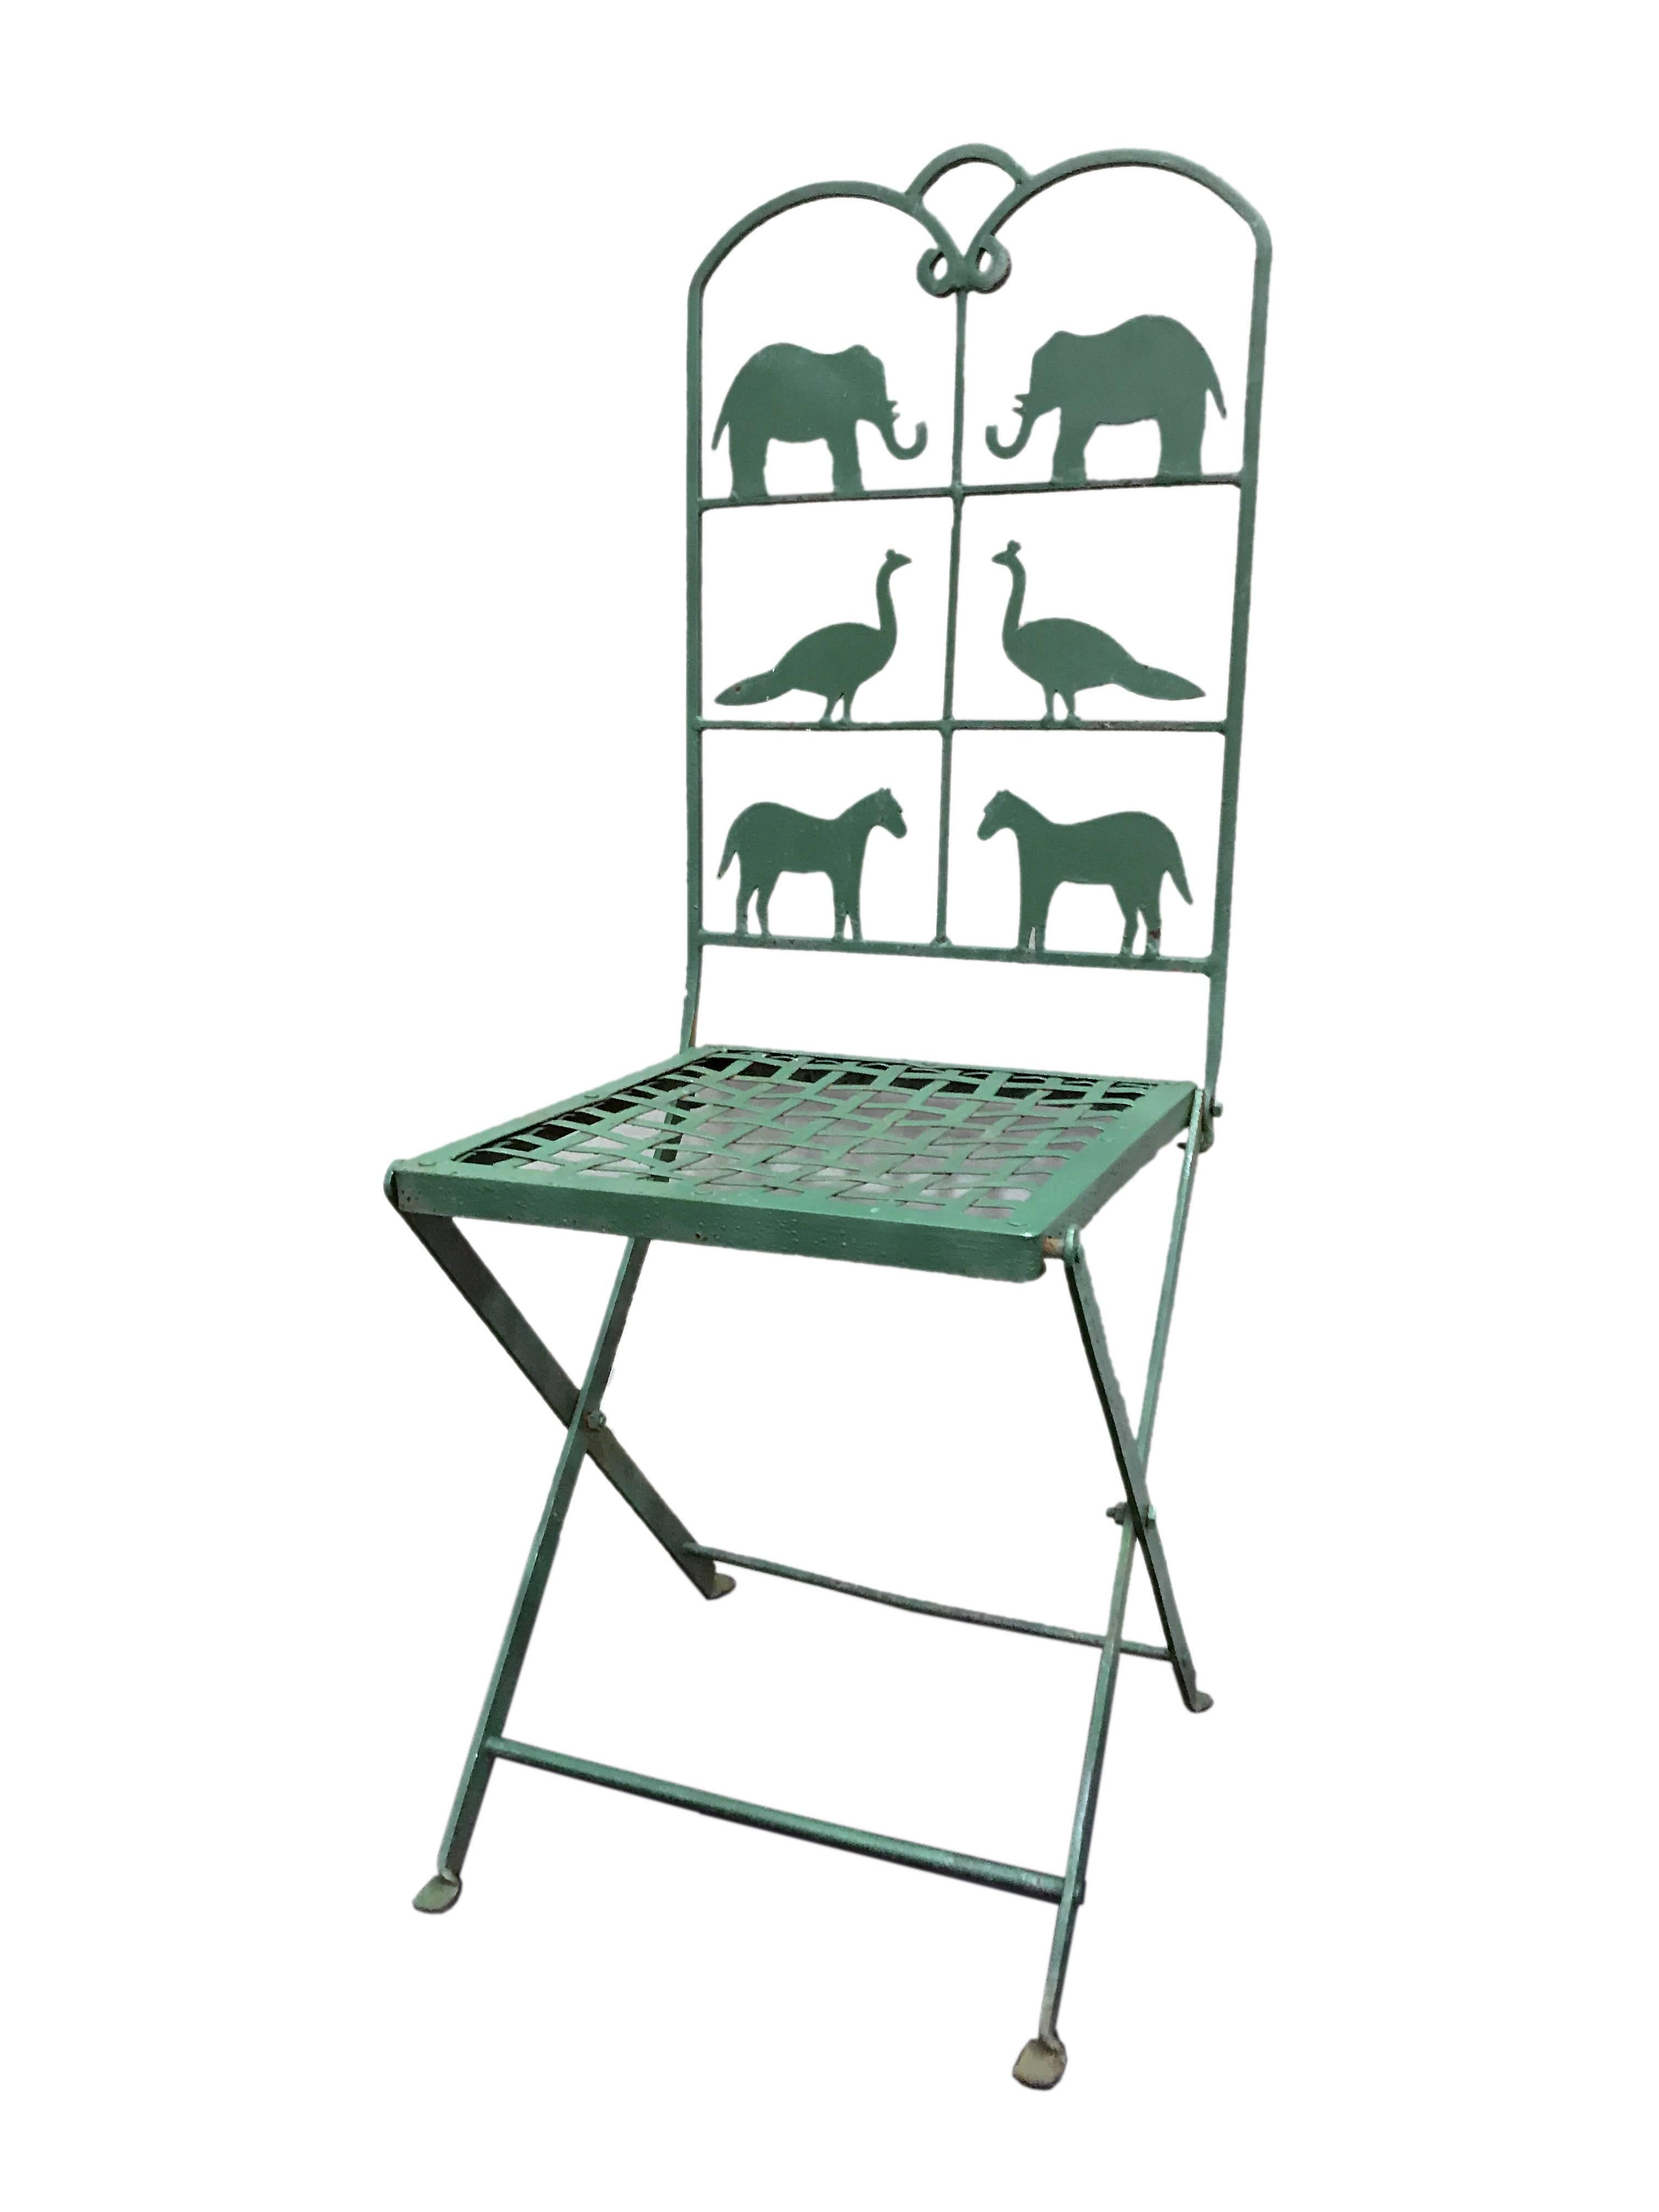 Set of four painted iron outdoor foldable chairs, green painted.
Characterized by the beautiful back with, in each one, a pair of elephants, a pair of peacocks and two horses.
USA, circa 1900. Sold as a set, not separately.
    